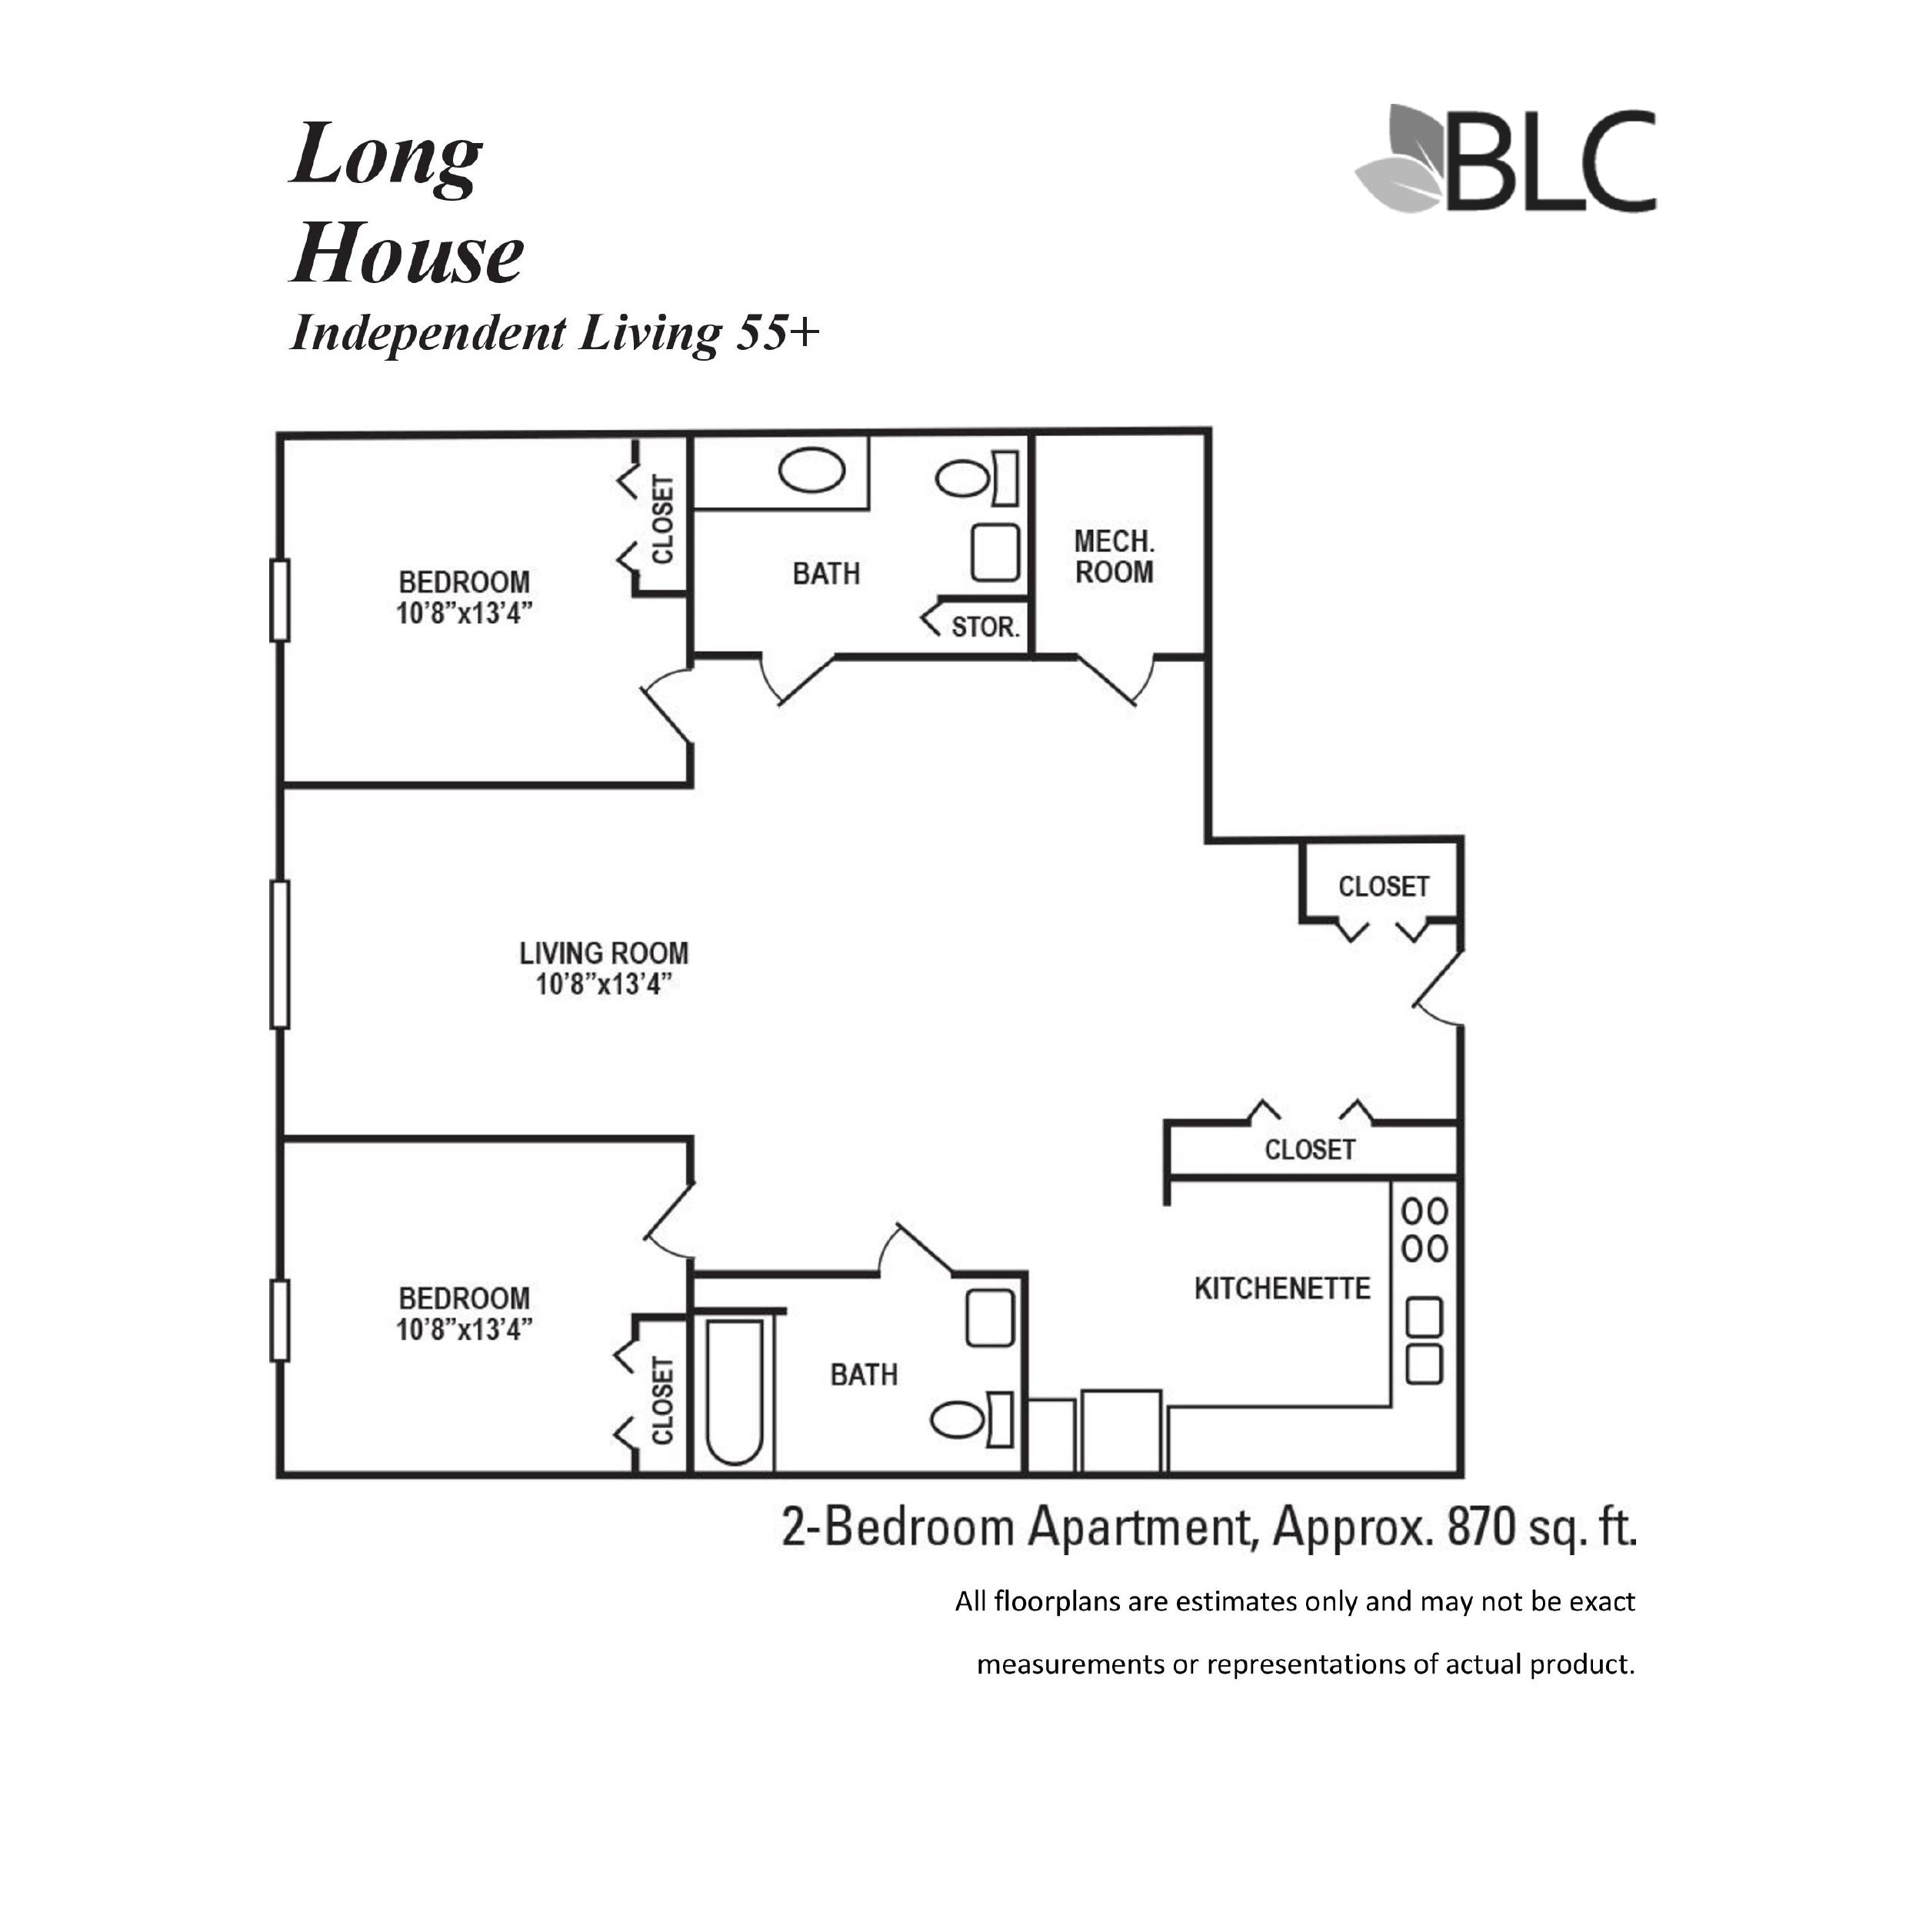 Long House 2 Bedroom Apartment